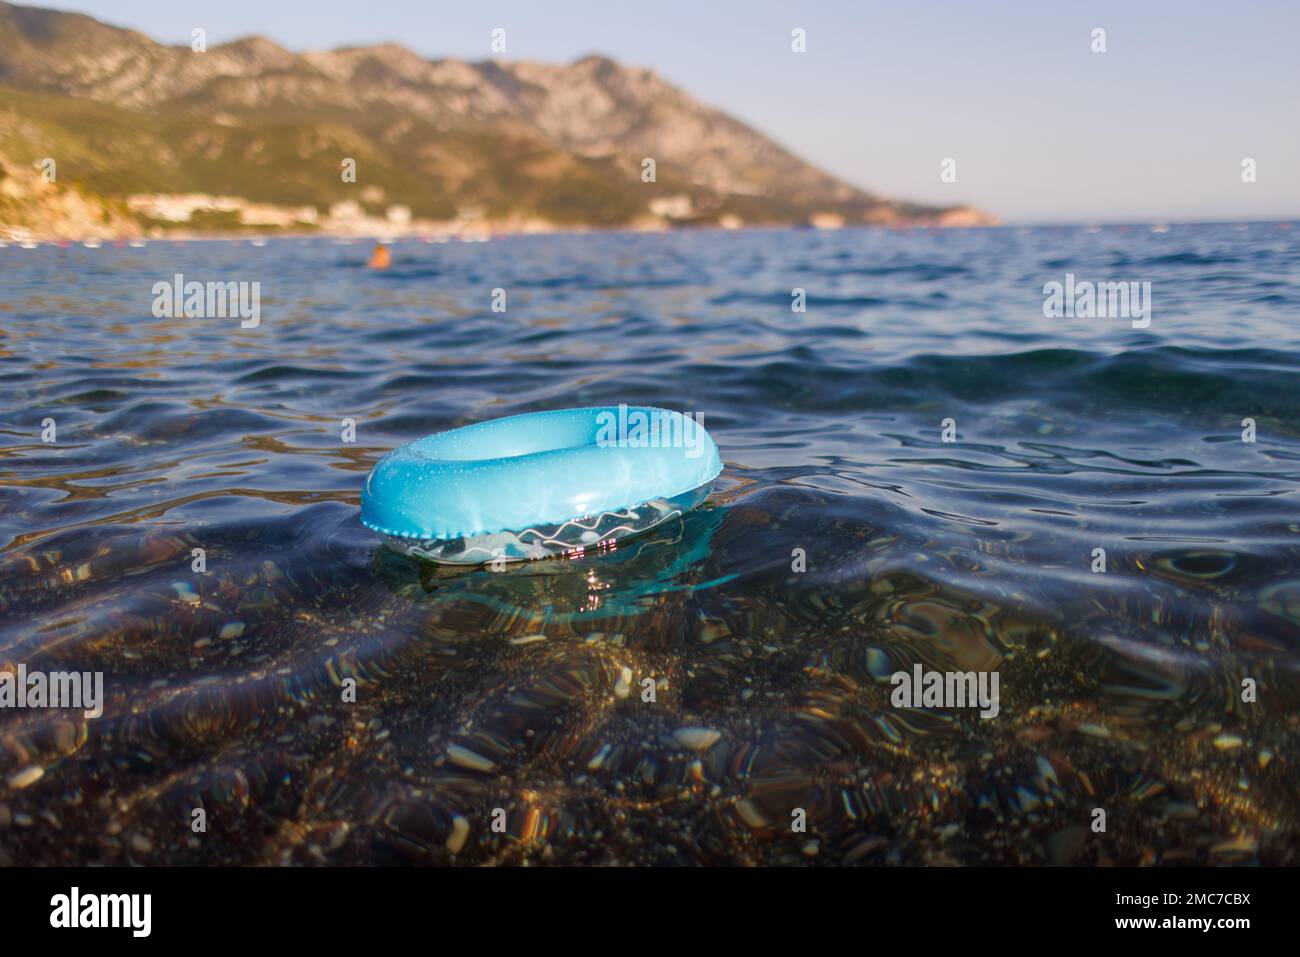 A blue rubber ring floats in the Adriatic Sea Stock Photo